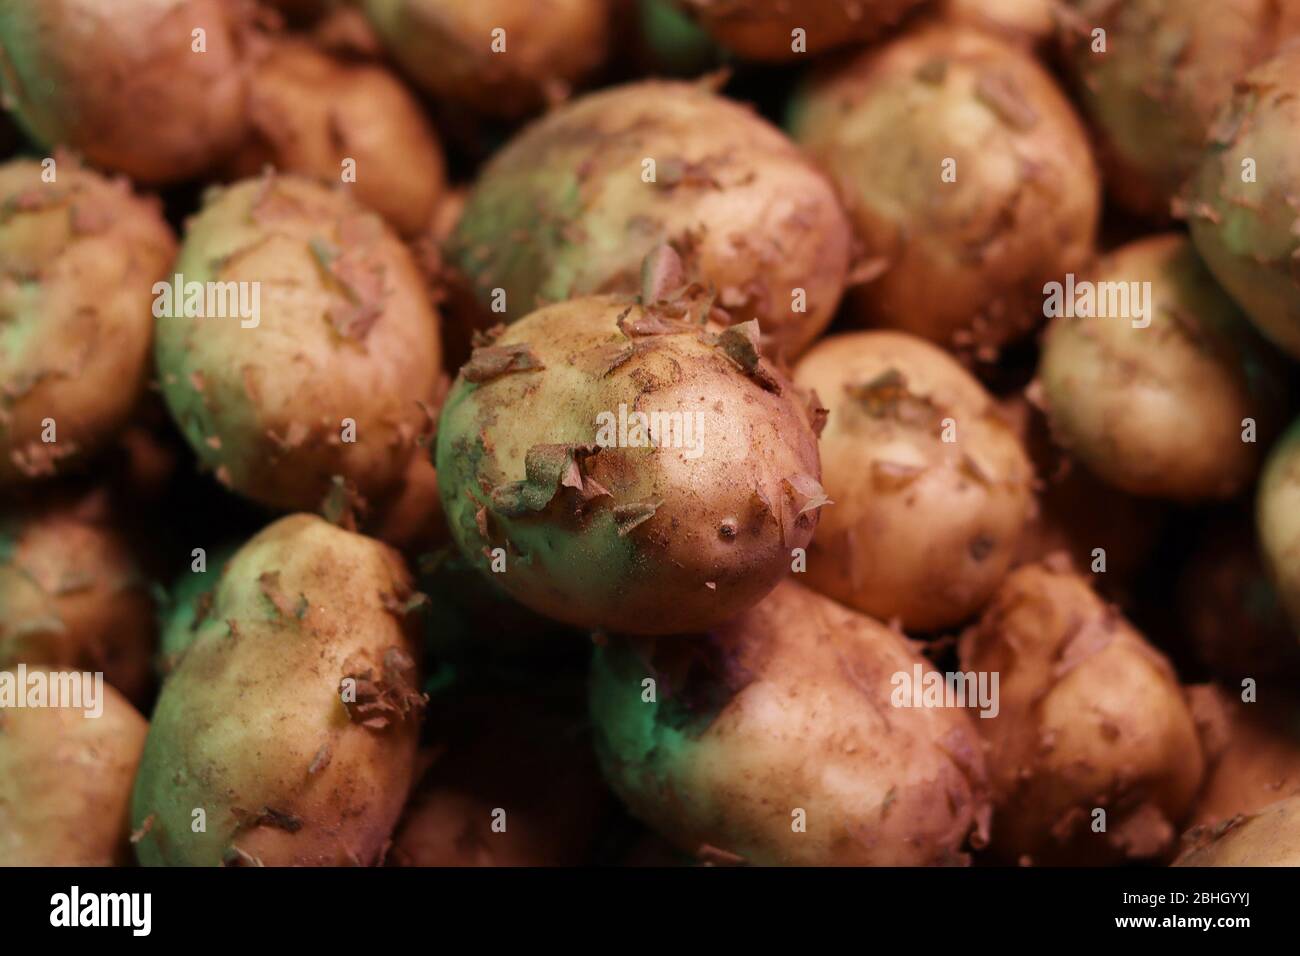 Potatoes for sale in the market. Stock Photo